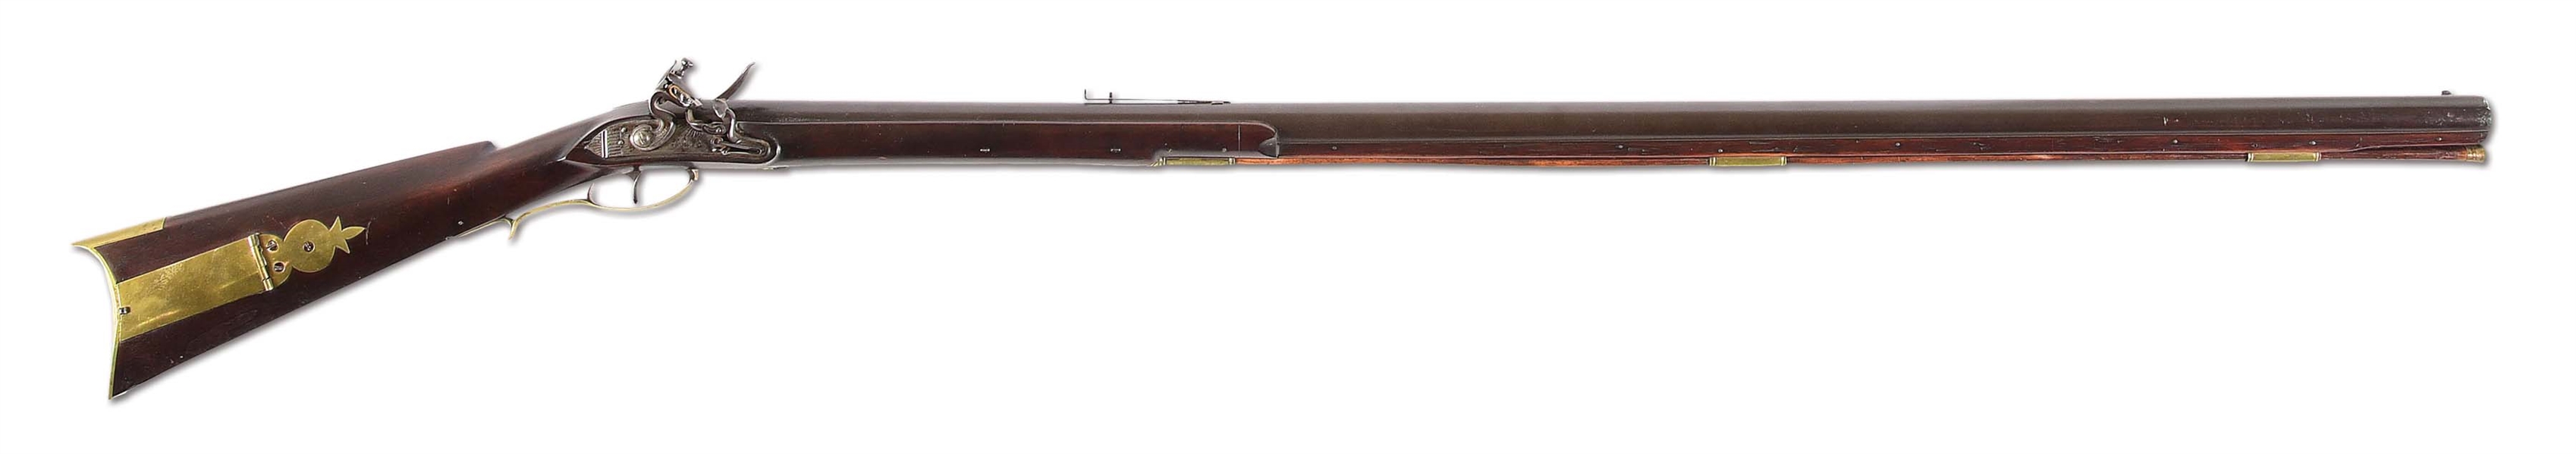 (A) NEW ENGLAND FLINTLOCK TARGET RIFLE BY PAYSON AND NURSE.